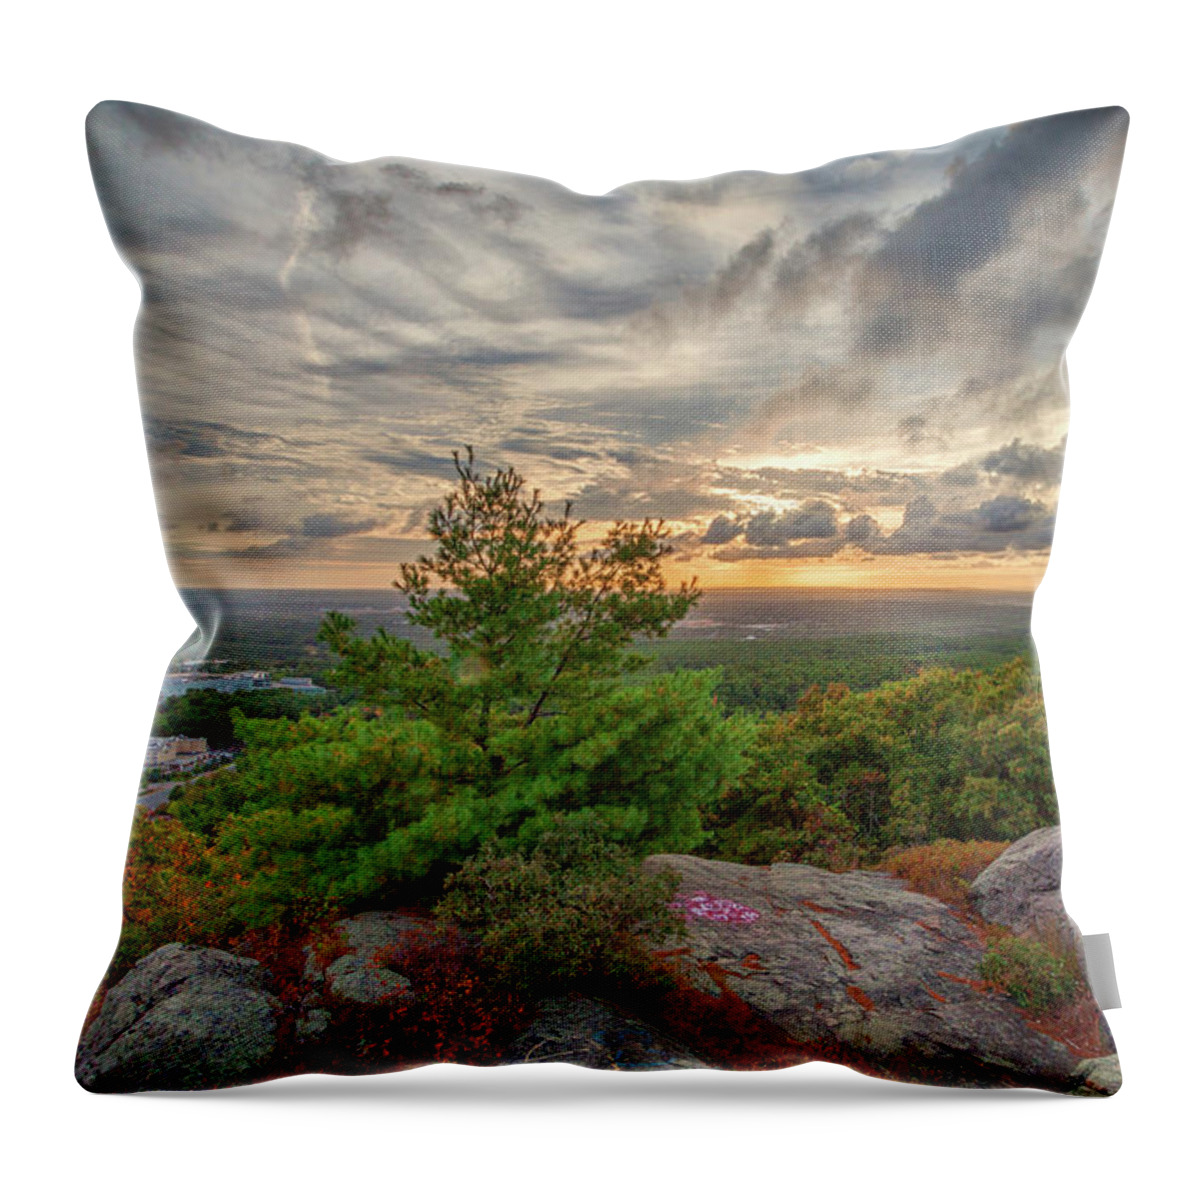 Sunset From The Skyline Trail Throw Pillow featuring the photograph Sunset From The Skyline Trail by Brian MacLean